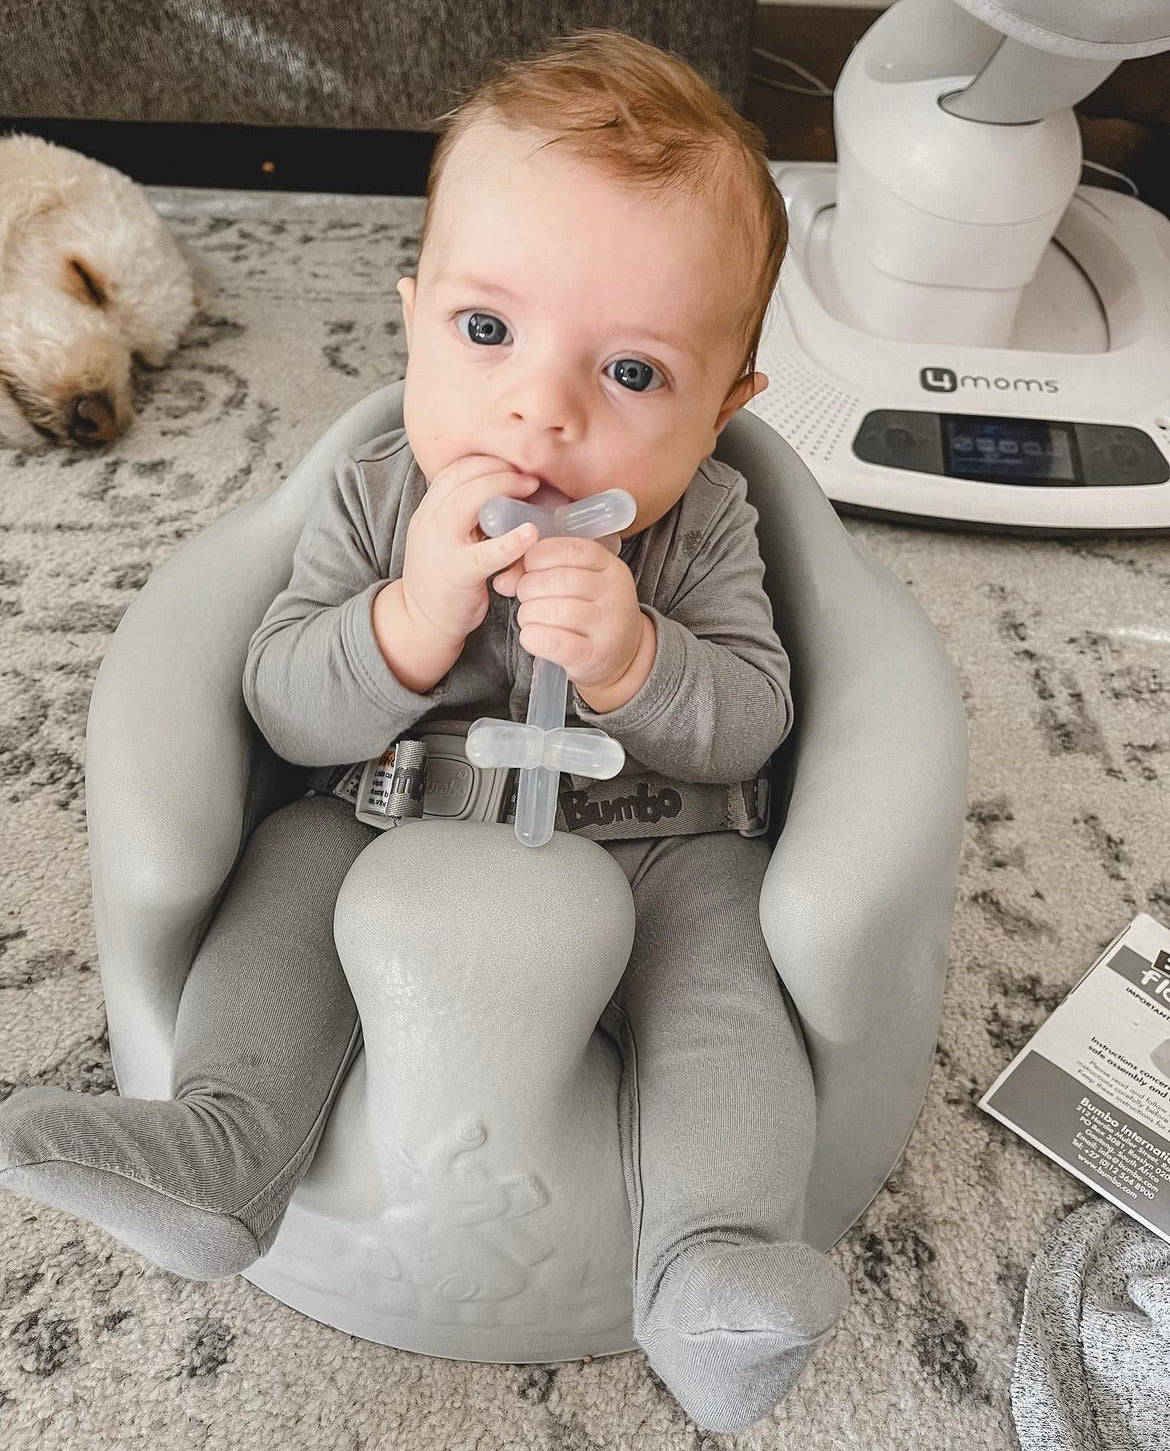 best teether toy for 3 month old